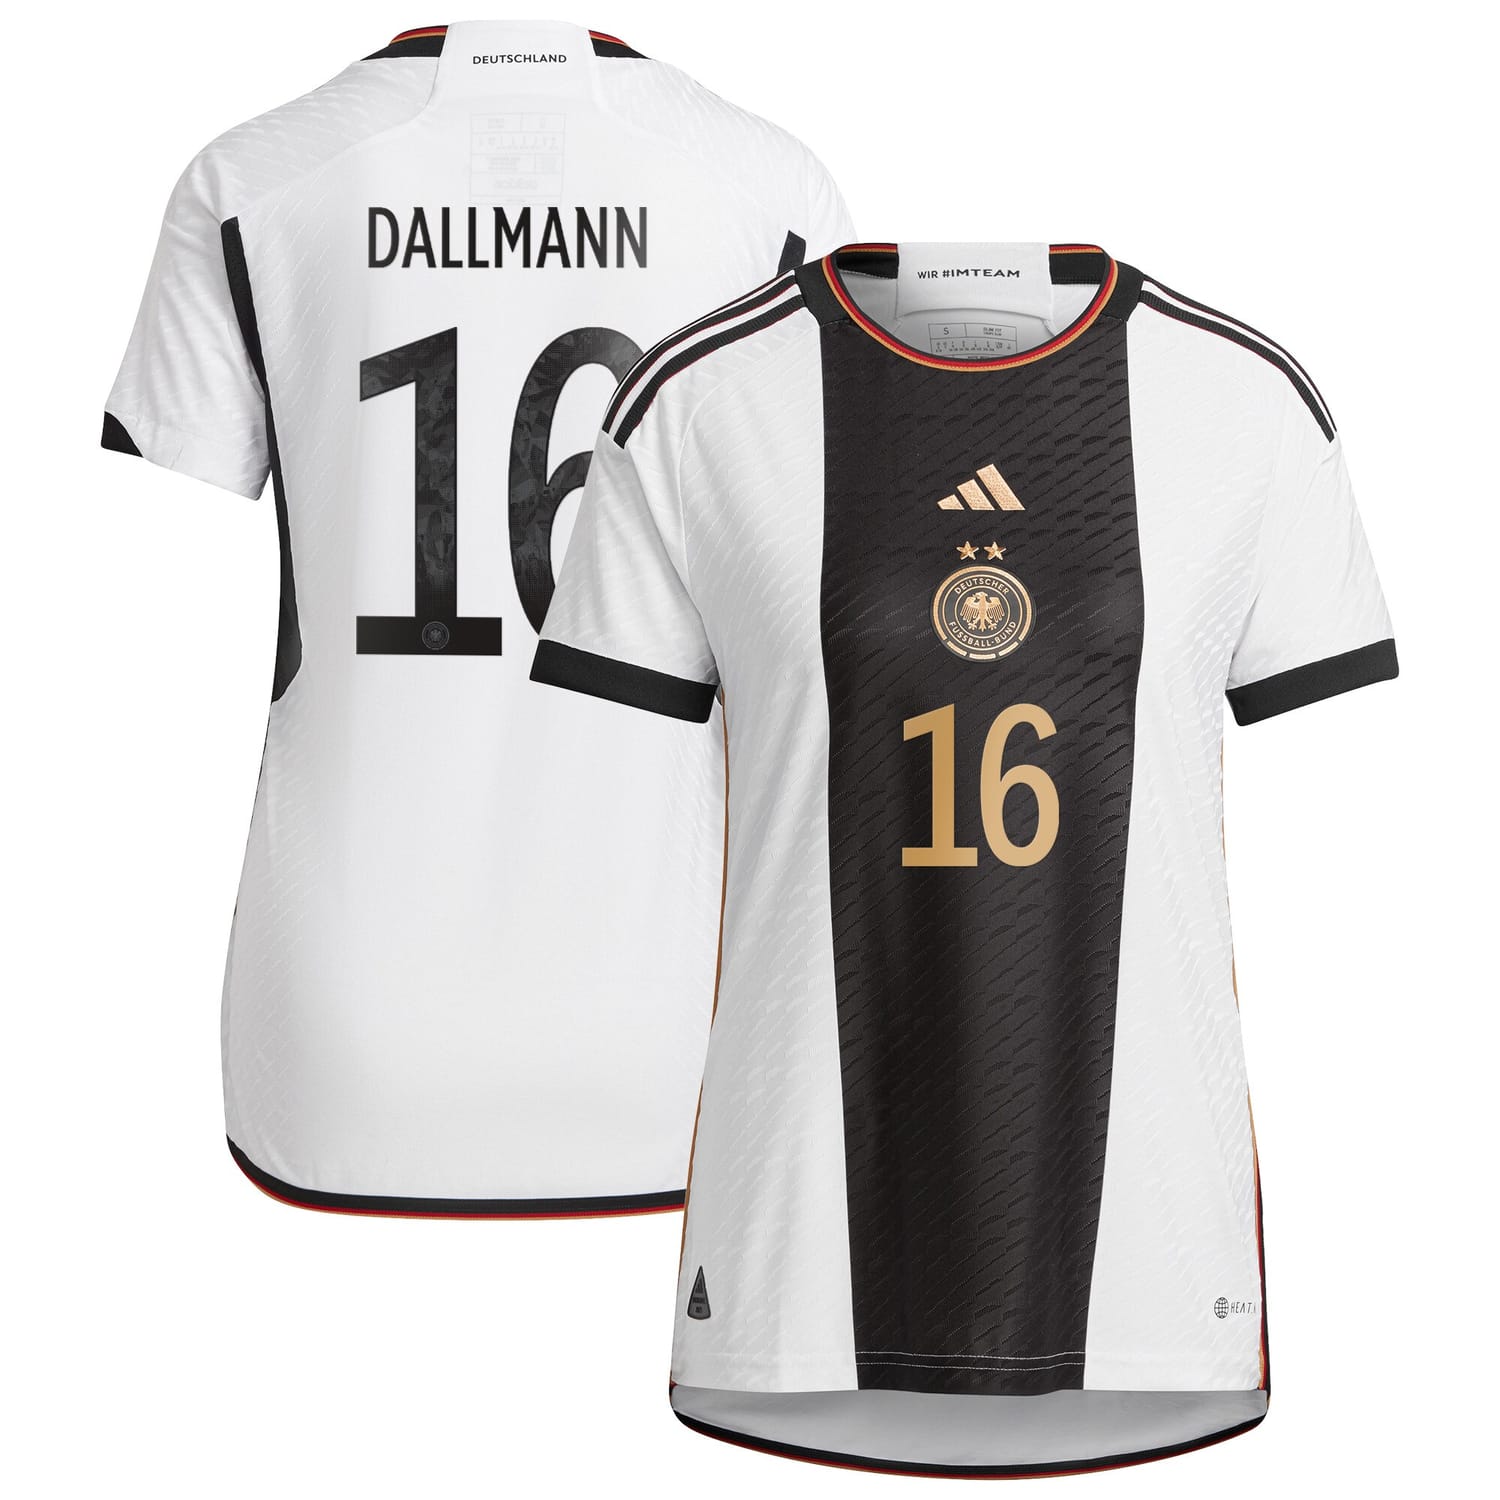 Germany National Team Home Authentic Jersey Shirt player Linda Dallmann 16 printing for Women